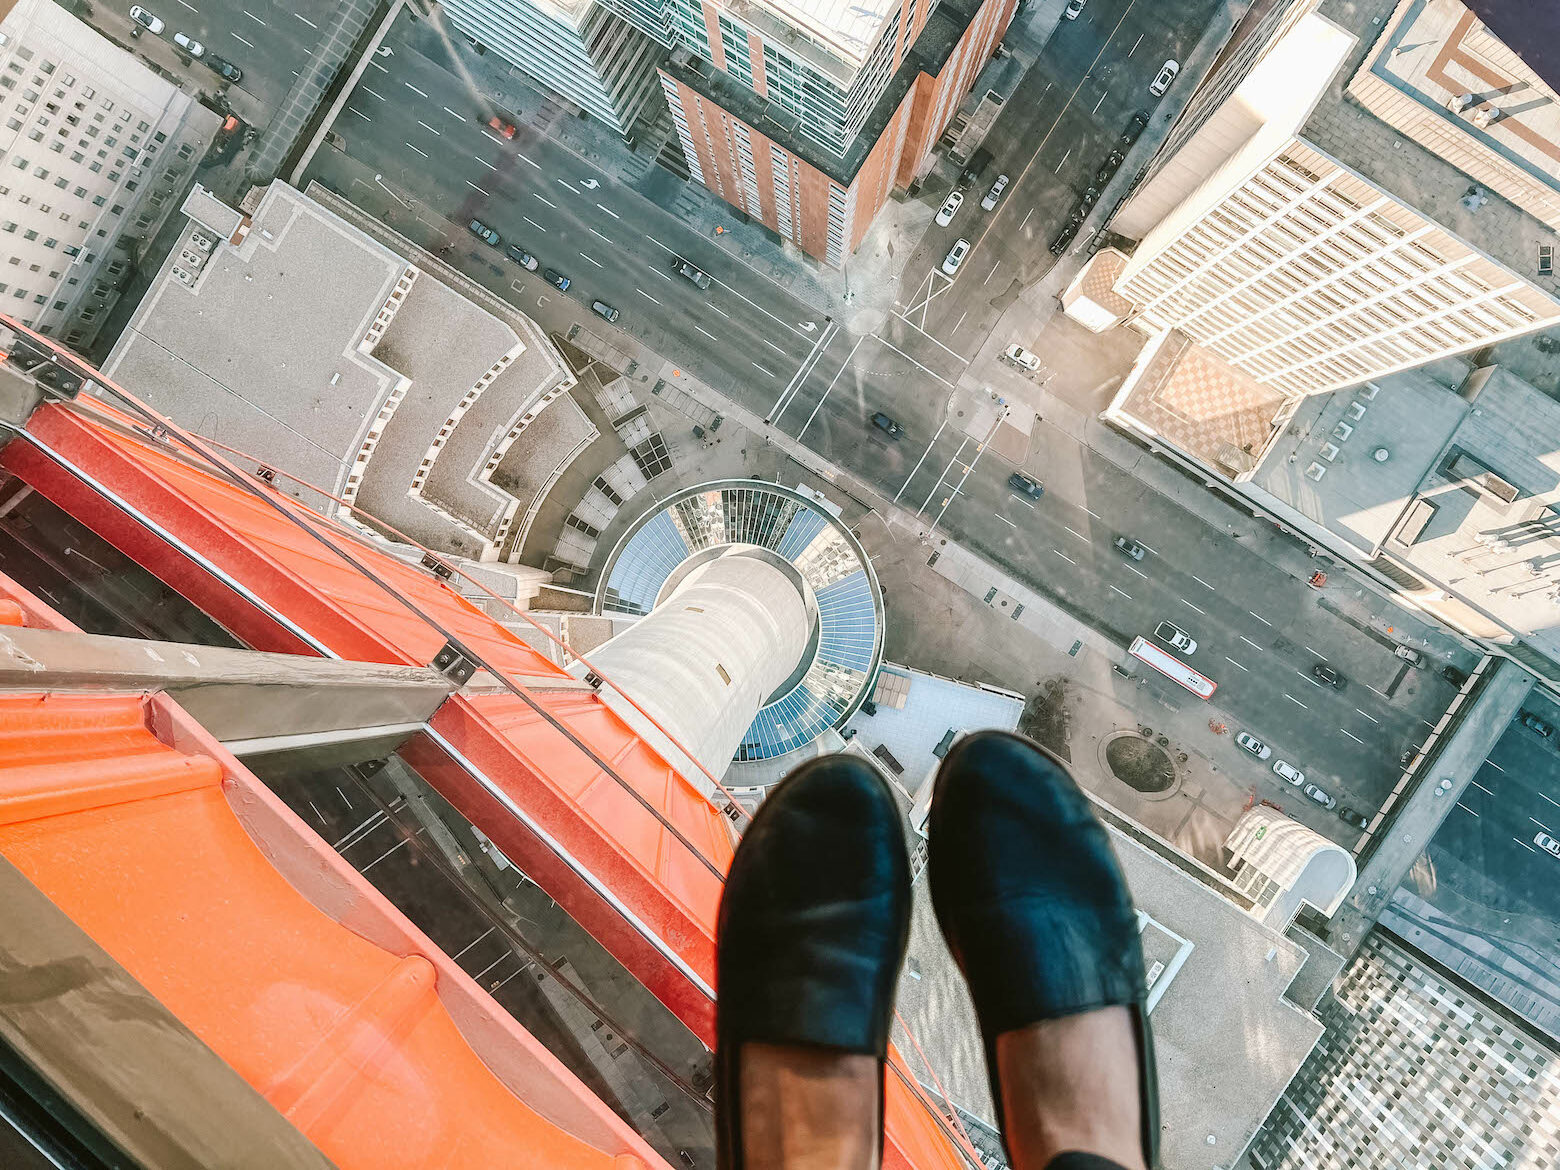 The glass floor at the Calgary Tower